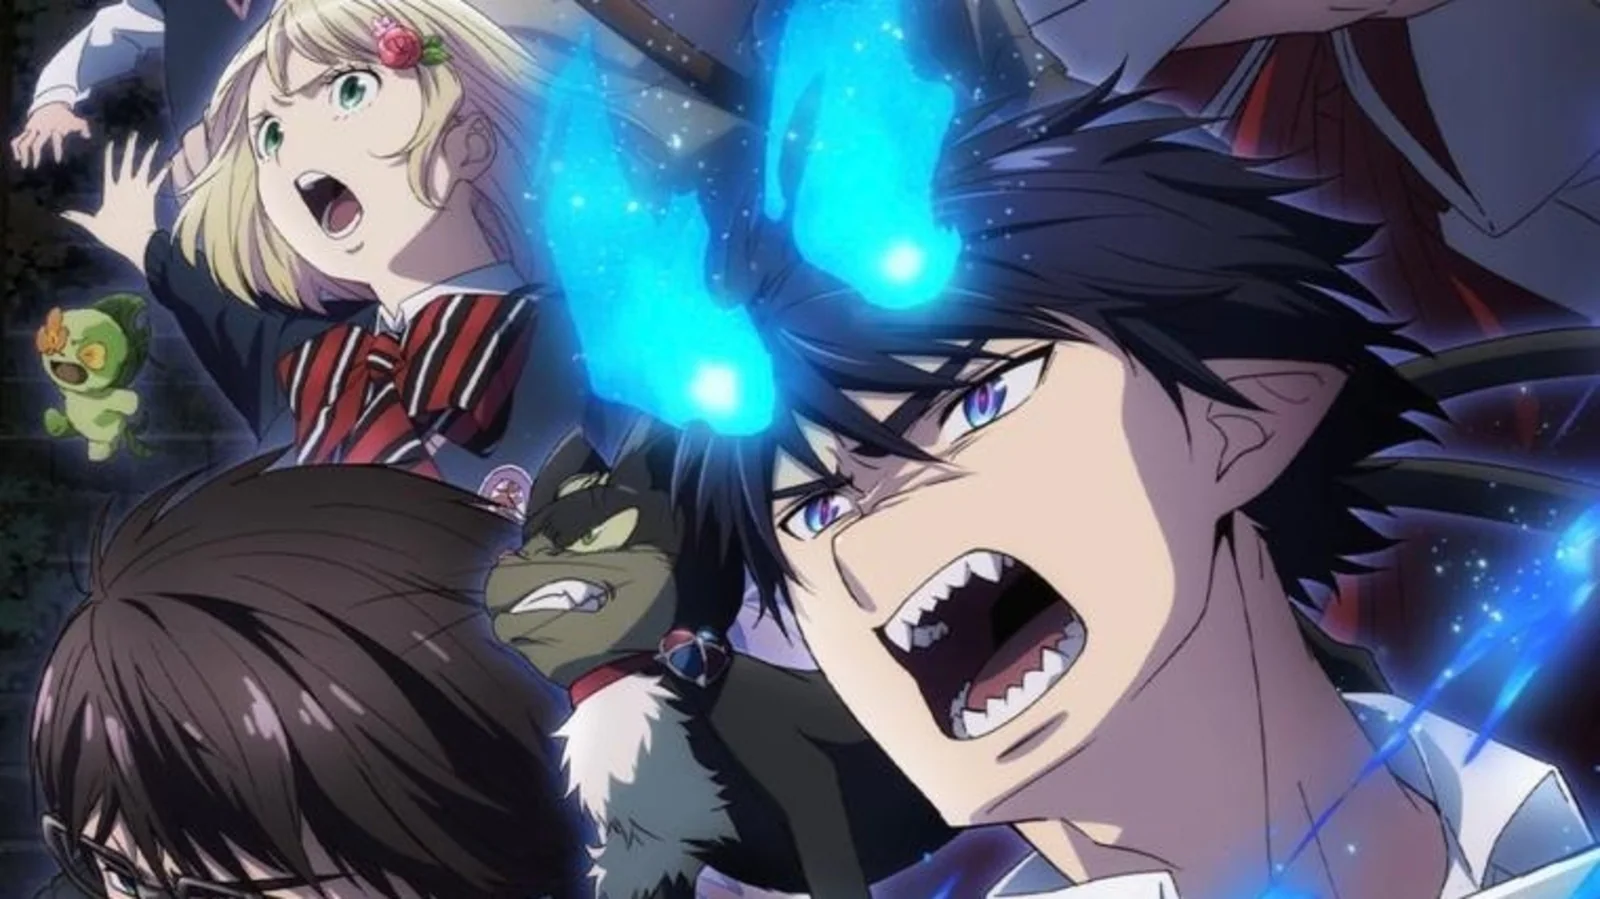 Exciting Update Blue Exorcist Season 3 Hits Screens - Heres Your Complete Guide to Catch Every Episode